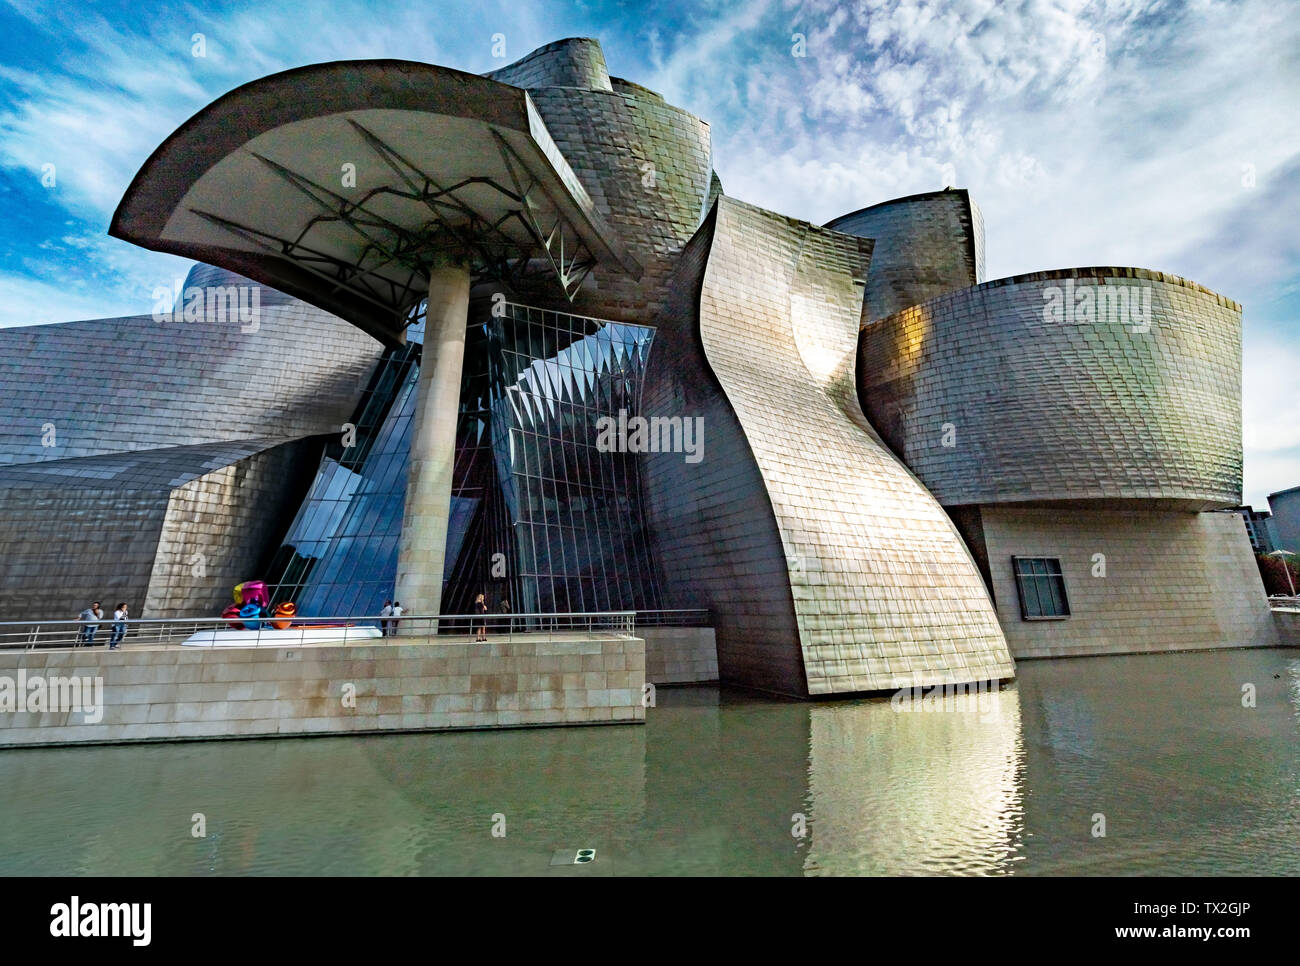 Learn About Frank Gehry Architecture, One of the Most Iconic Architects